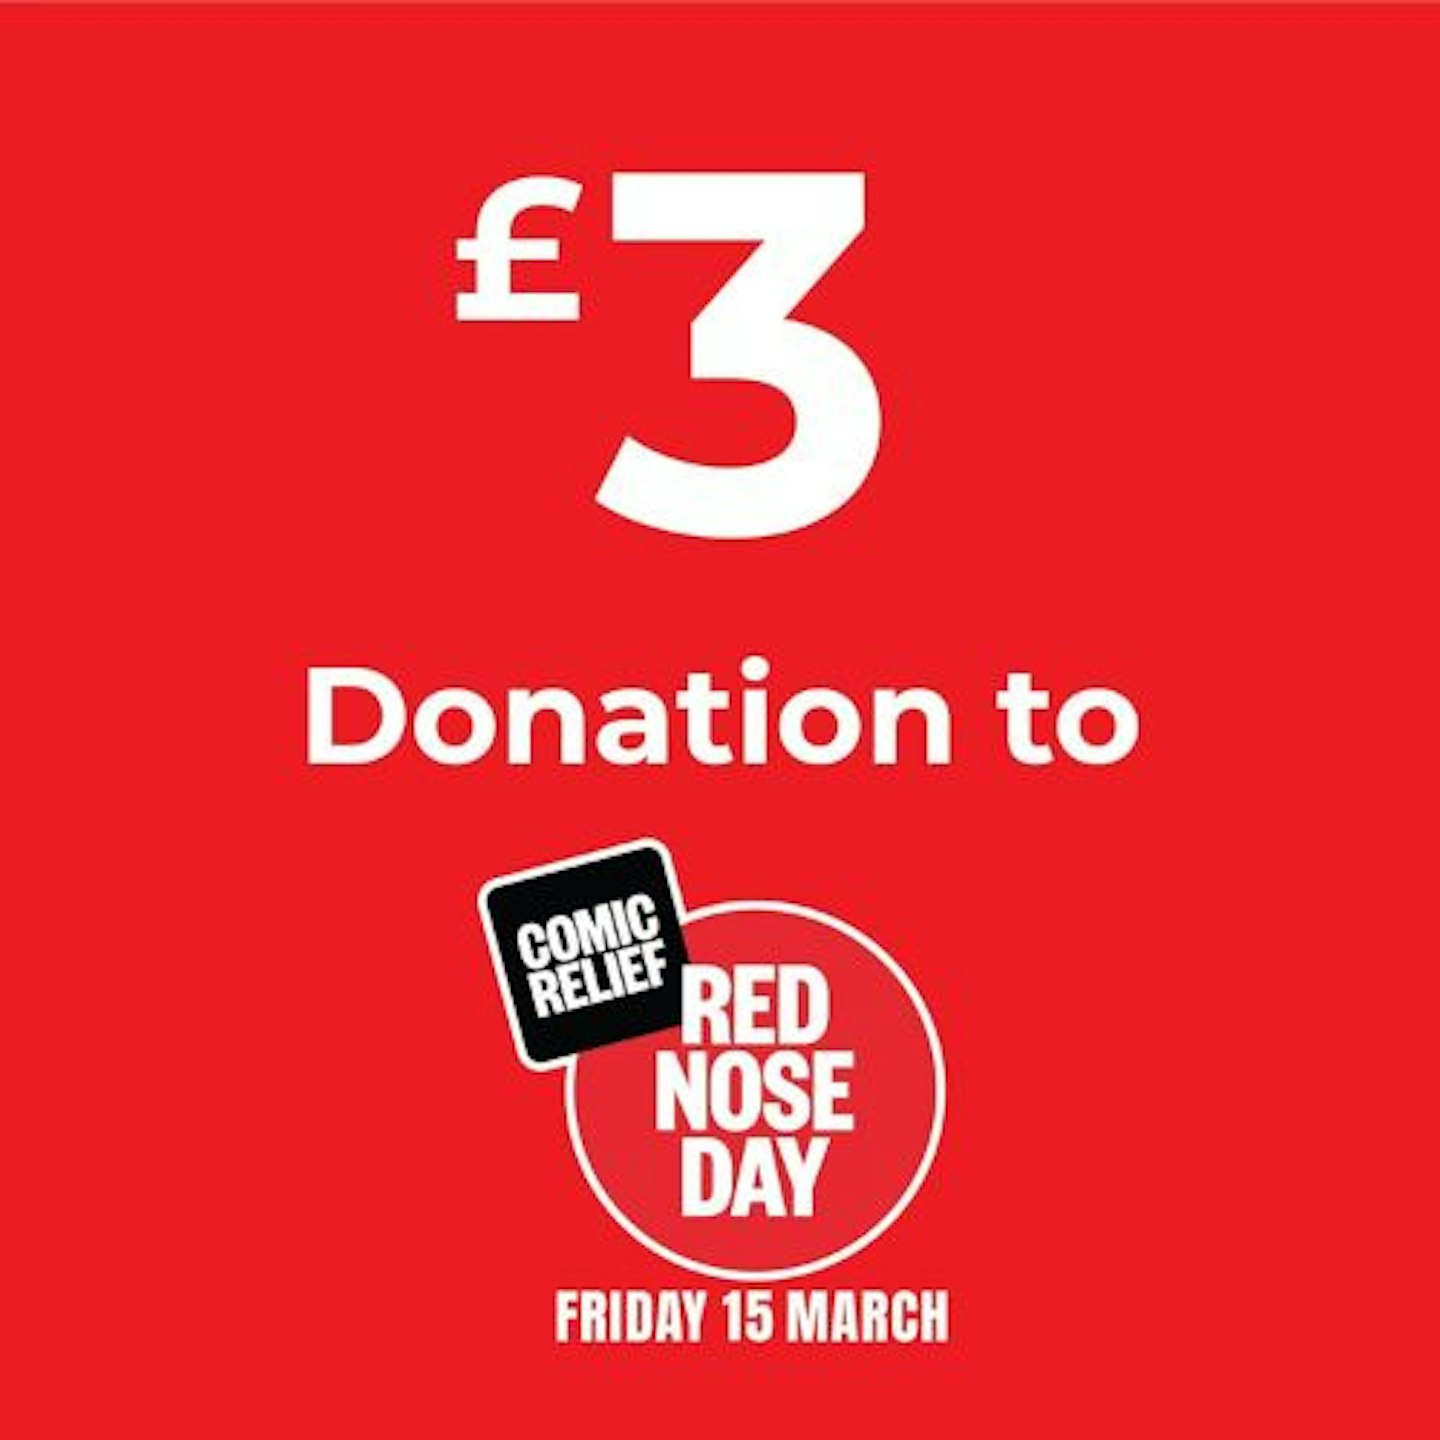 £3 Donation to Comic Relief